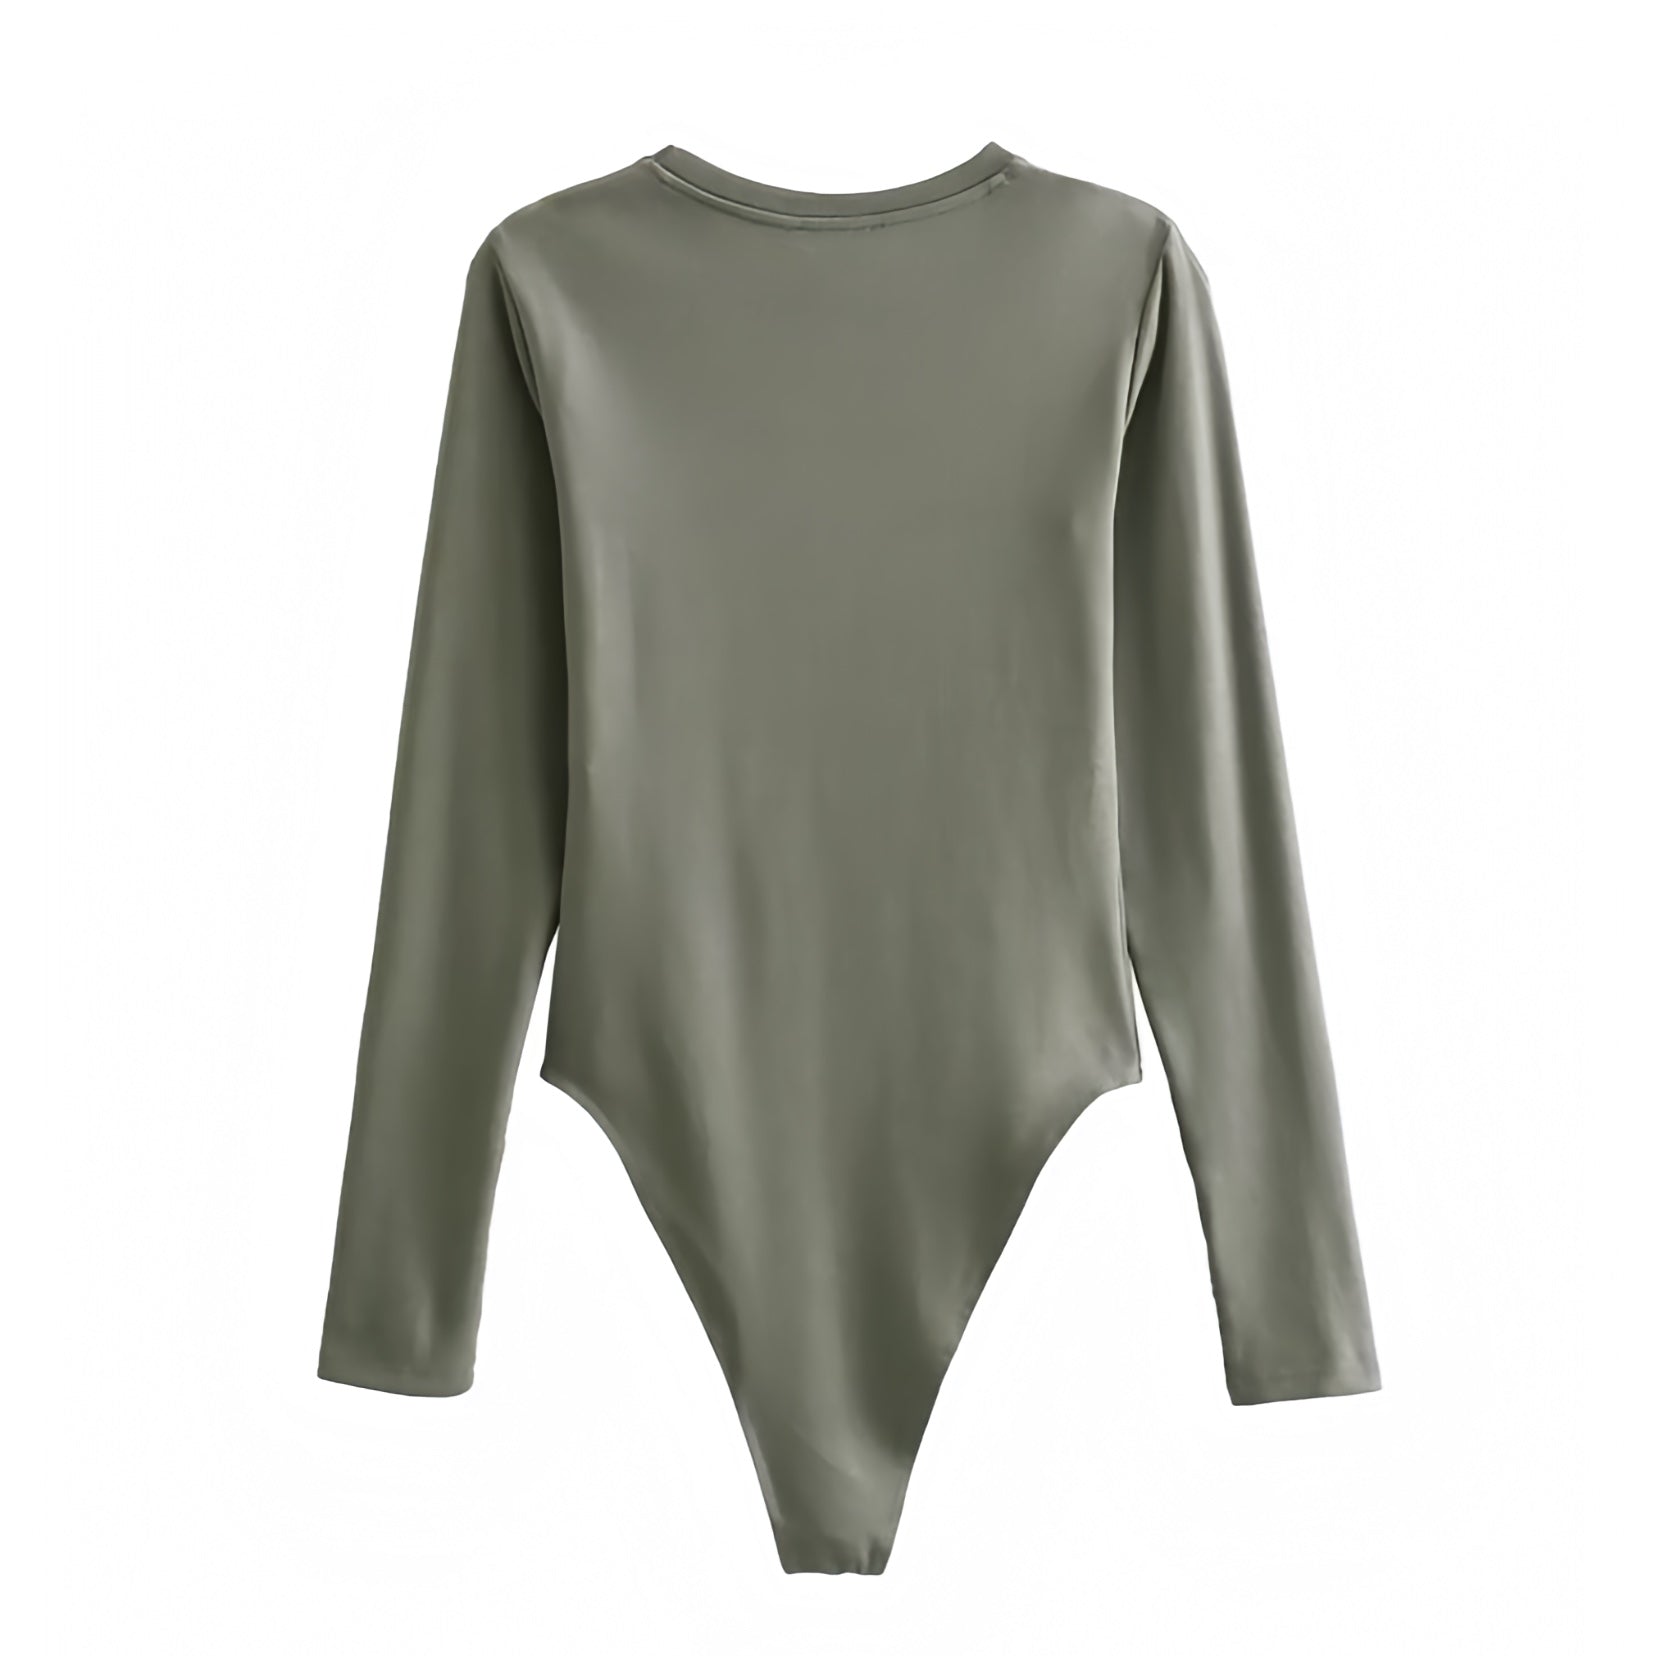 olive-green-neutral-cotton-bodycon-slim-tight-fitted-long-sleeve-round-neck-one-piece-bodysuit-top-under-shirt-comfy-cozy-stretchable-lounge-wear-women-ladies-spring-2024-summer-casual-chic-basic-essential-minimalist-sexy-spandex-feminine-skims-dupe-zara-revolve-aritzia